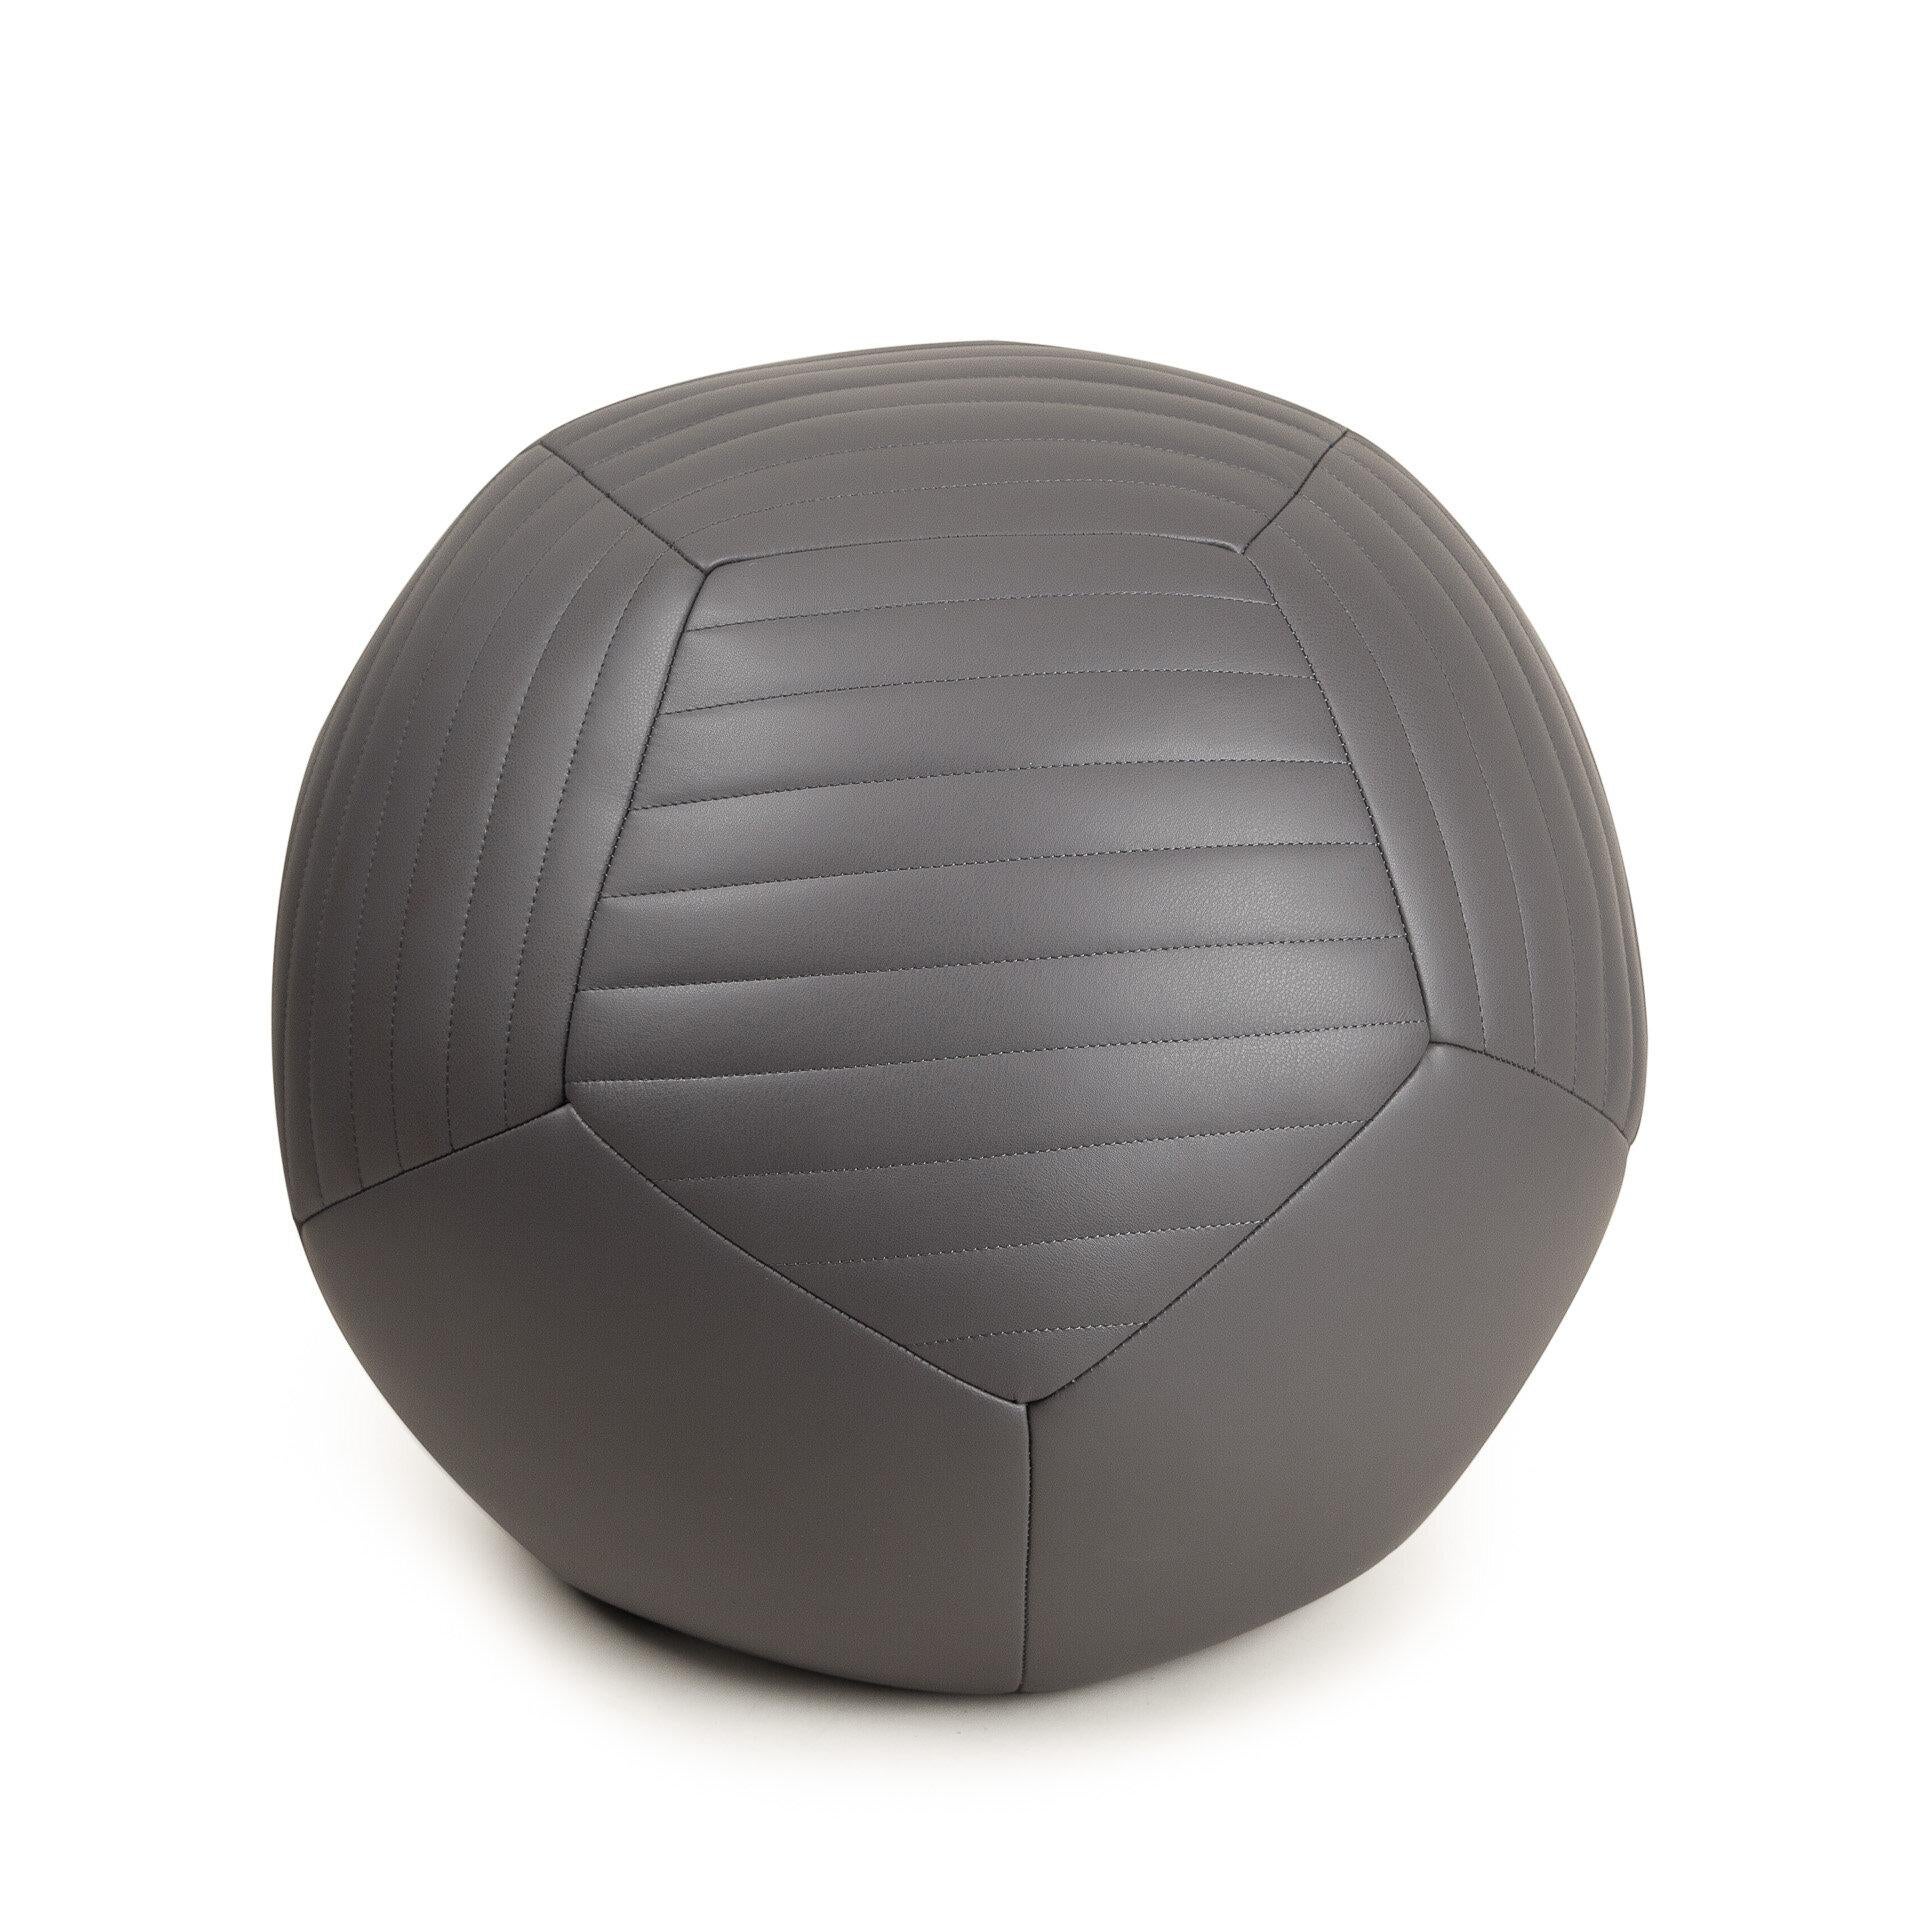 Crafted with supple European leather, the Half-Banded Ottoman by Moses Nadel is designed to add a twist to living room seating and act as a comfortable place to rest your legs or as playful and sculptural decor. Moses Nadel hand cuts each 5-sided